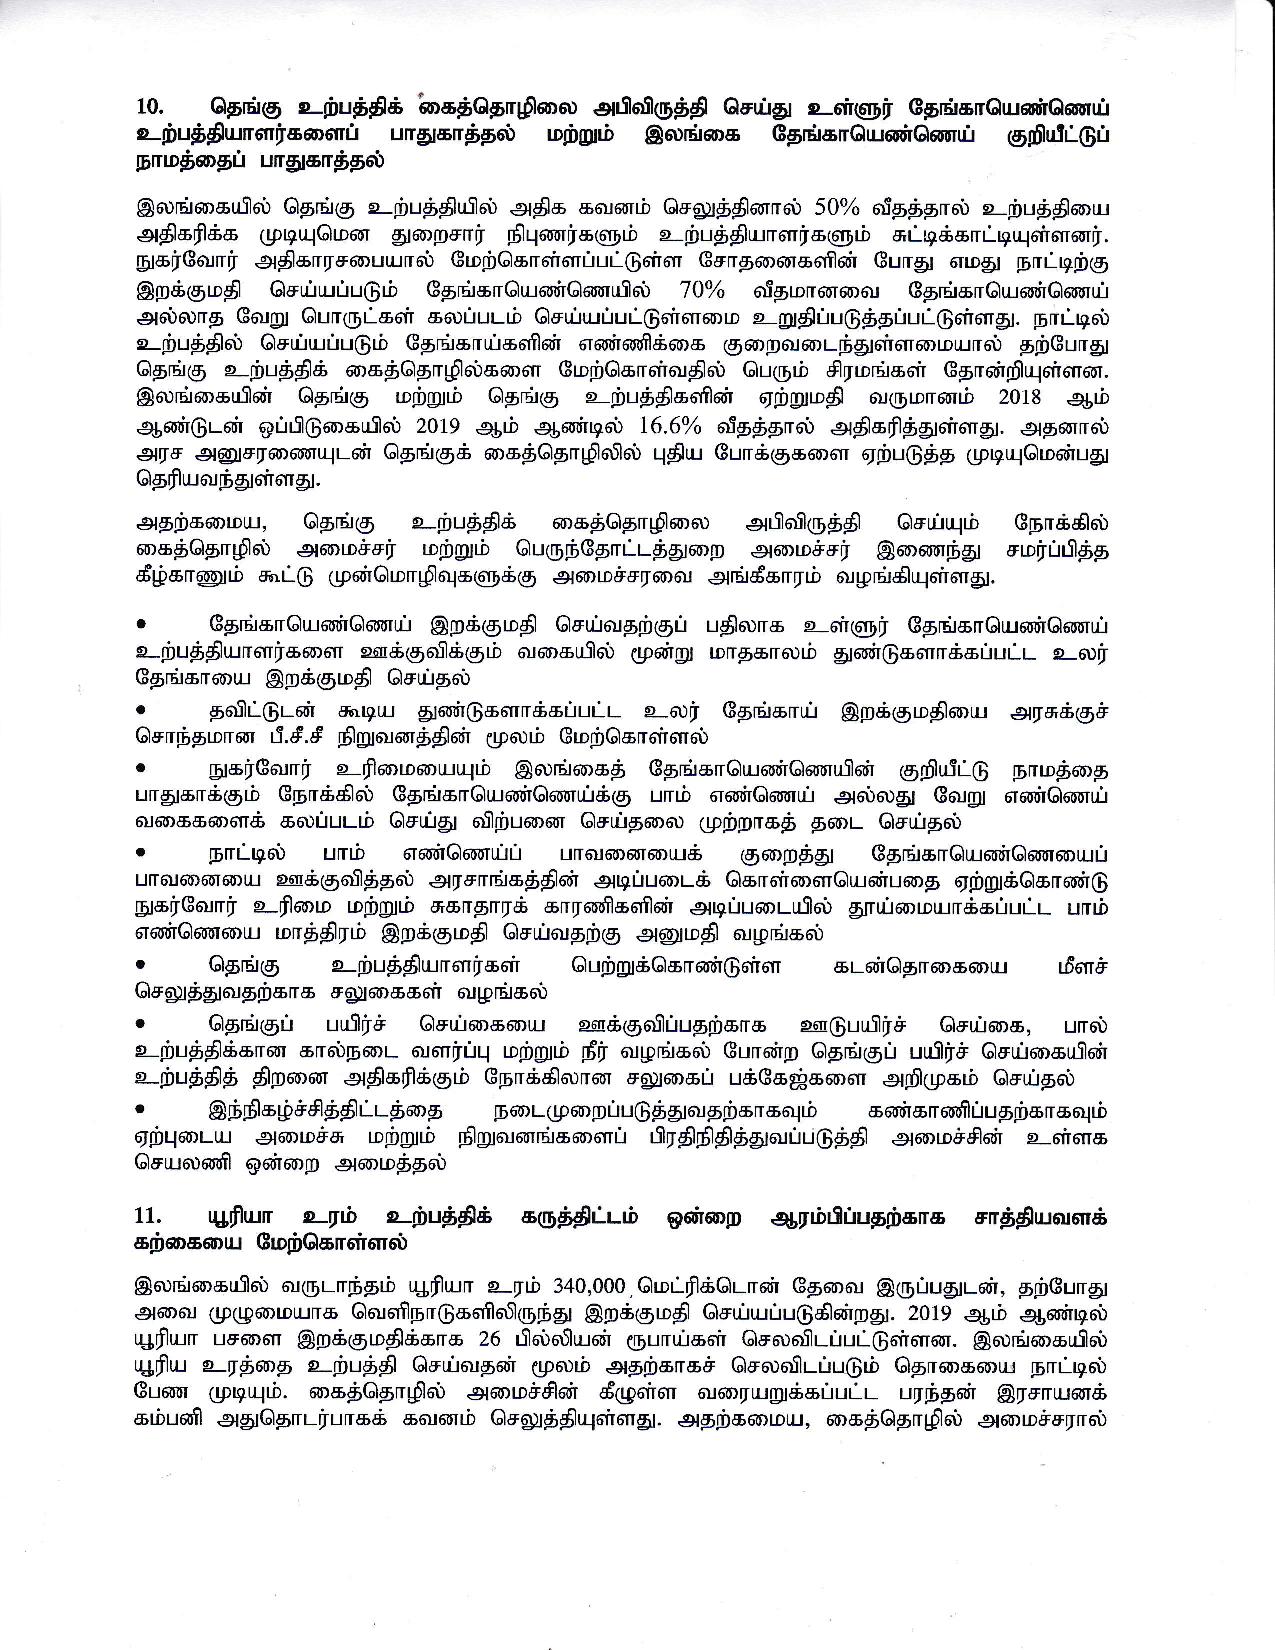 Cabinet Decision on 21.12.2020 Tamil page 004